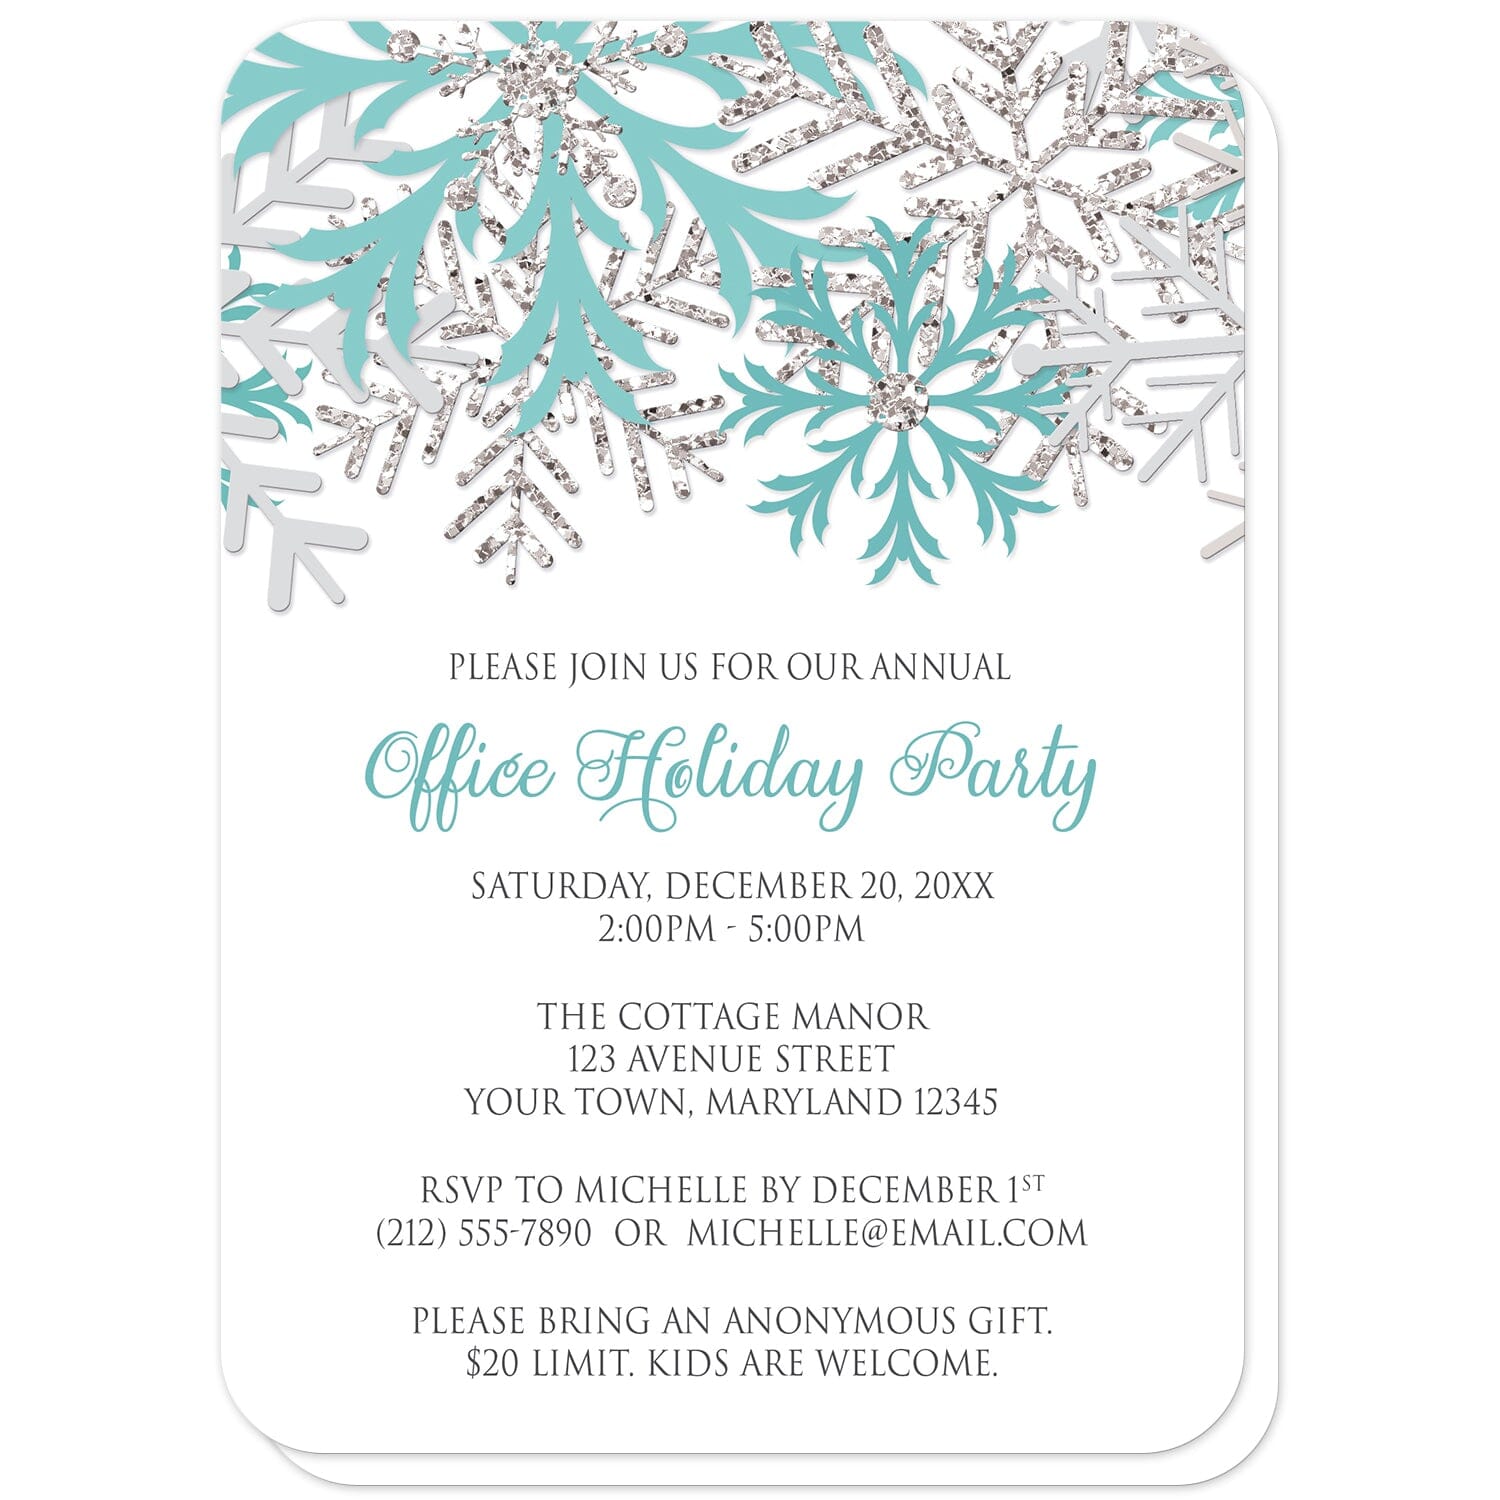 Winter Teal Silver Snowflake Holiday Party Invitations (with rounded corners) at Artistically Invited. Winter teal silver snowflake holiday party invitations with teal, light teal, and silver-colored glitter-illustrated snowflakes over a white background. Your personalized party details for your home or office party are custom printed in gray and teal. The occasion title is printed in a whimsical teal script font while your remaining details are printed in an all-capital letters gray serif font.